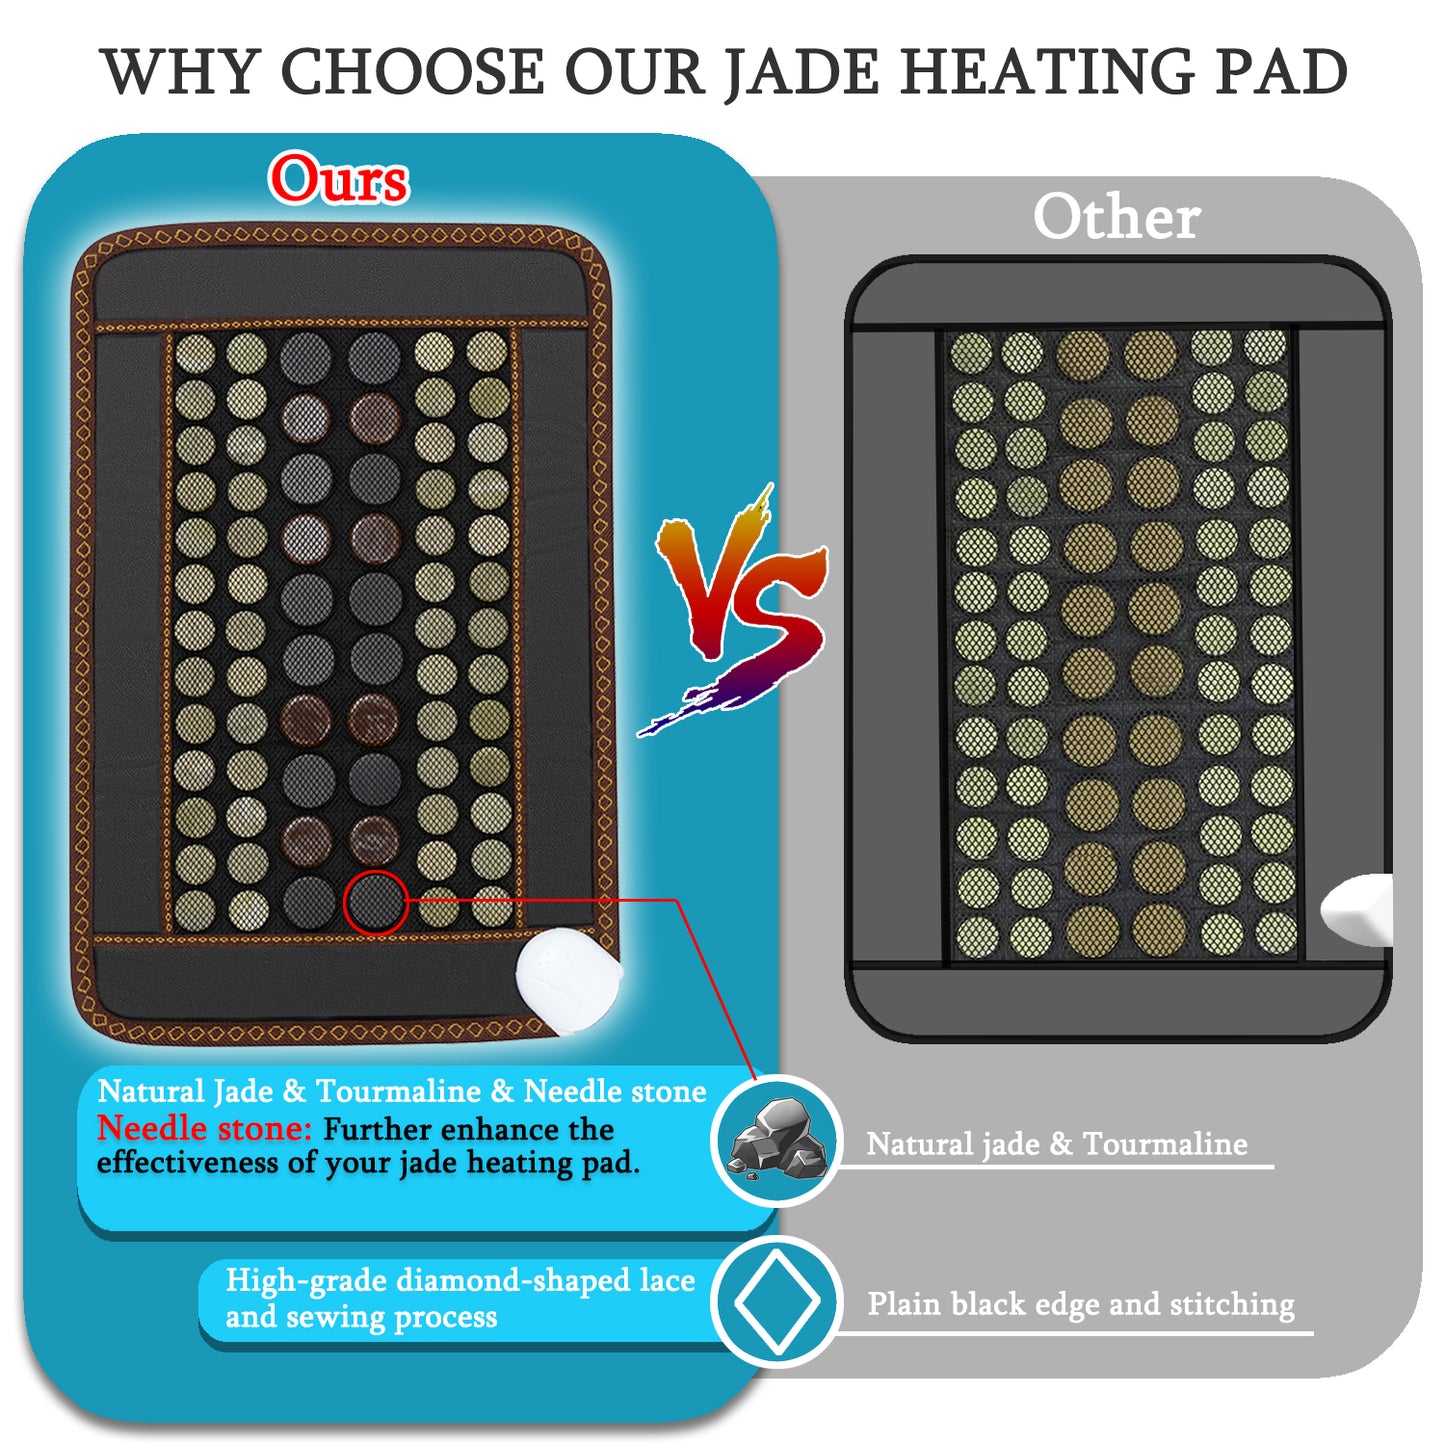 Far Infrared Heating Pad, Natural Jade and 2 Different Tourmaline Heating Pad, Electric Heating Pads for Back Neck Shoulders and Abdomen, Auto Shut Off Function (23.6" X 15.7")